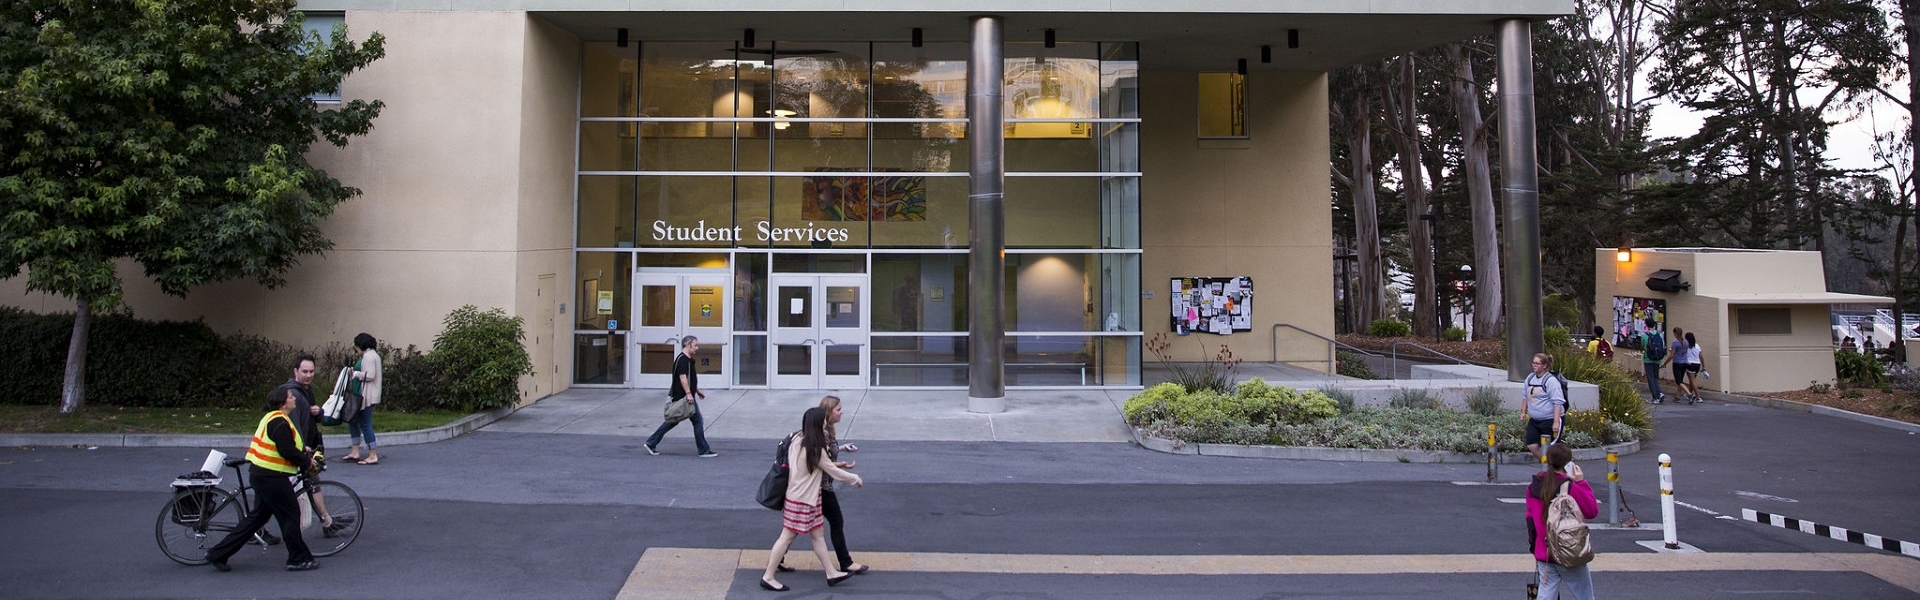 Student Services Building with students walking outside